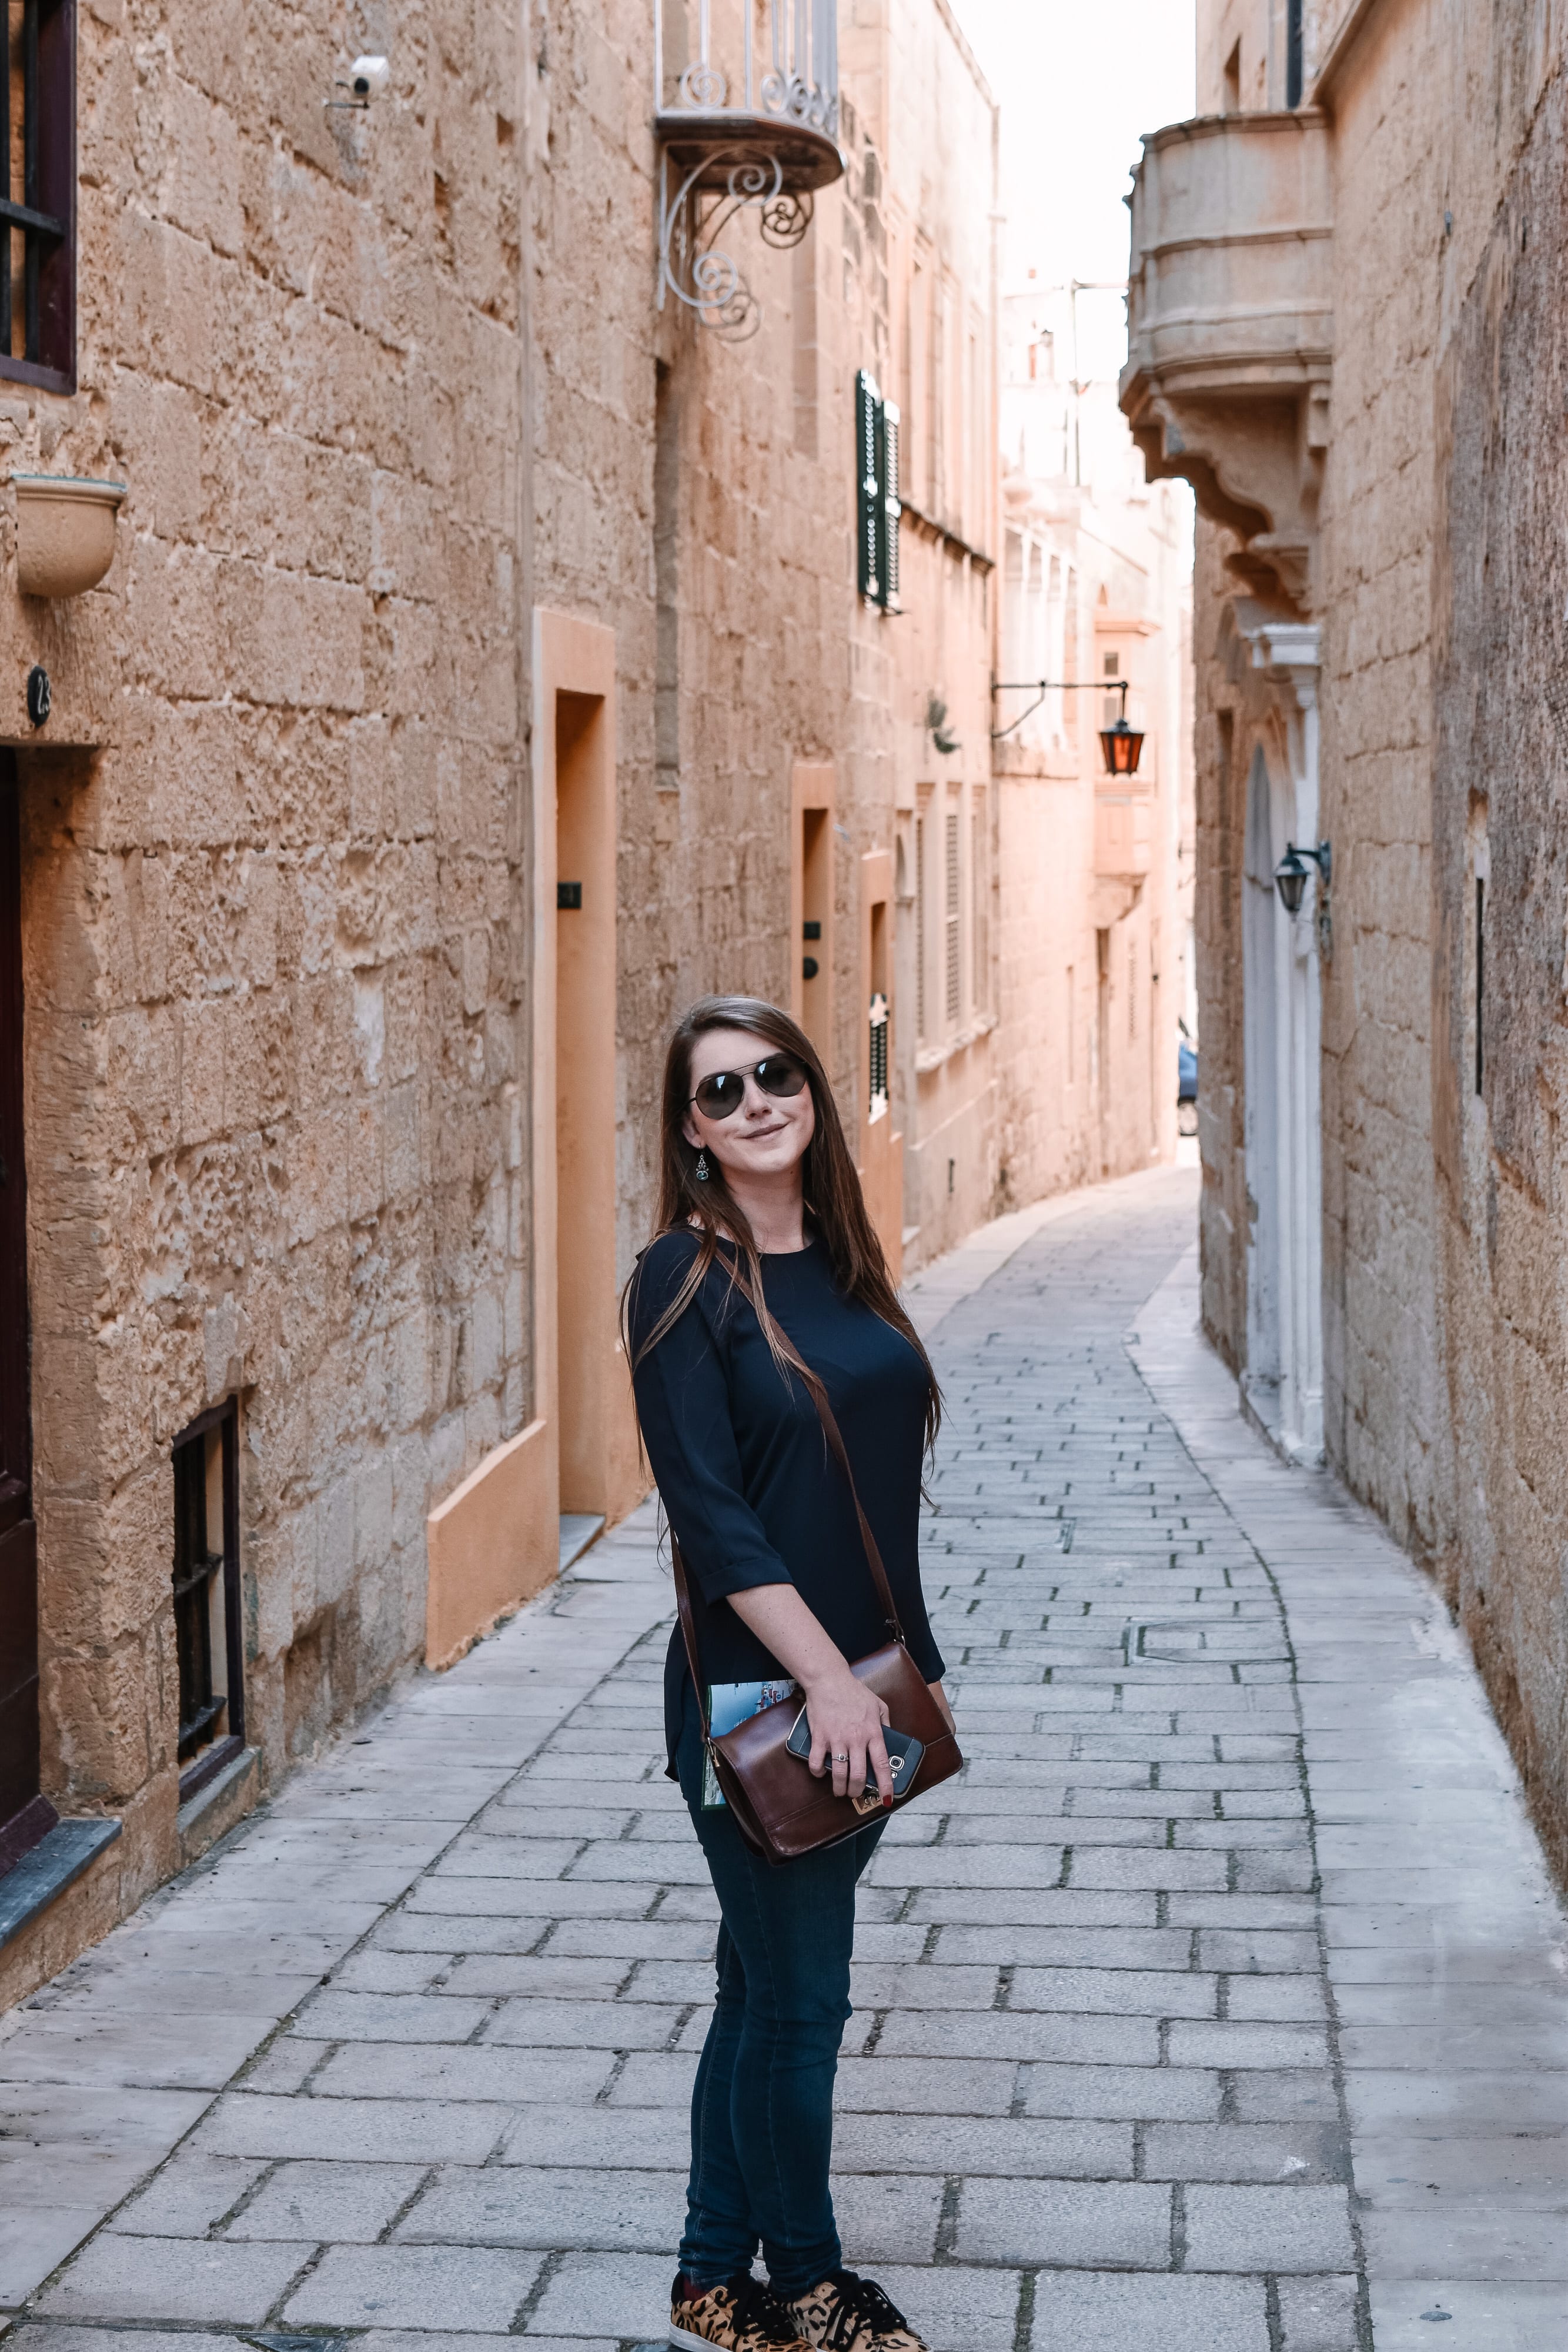 Postcards From The Silent City of Mdina, Malta